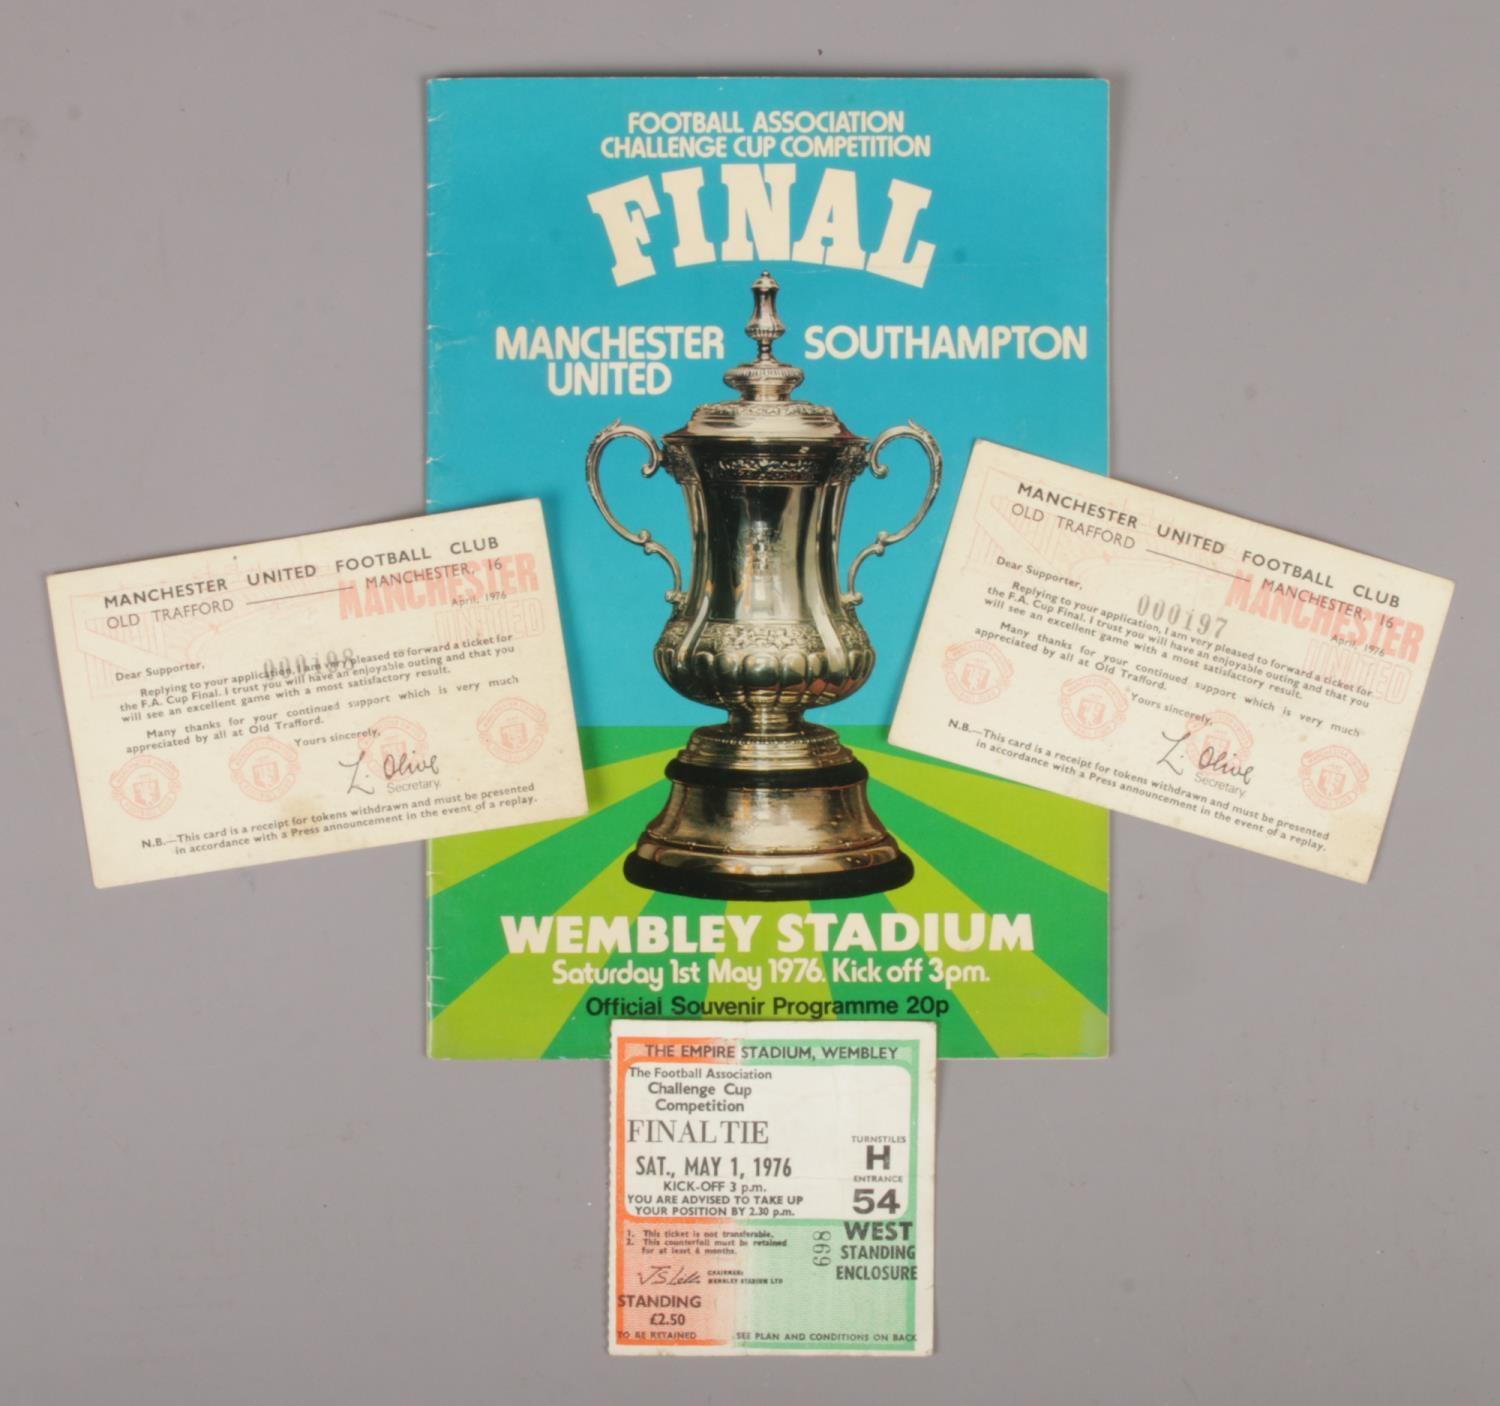 A 1976 FA Cup final football souvenir programme, Manchester United vs Southampton, with two